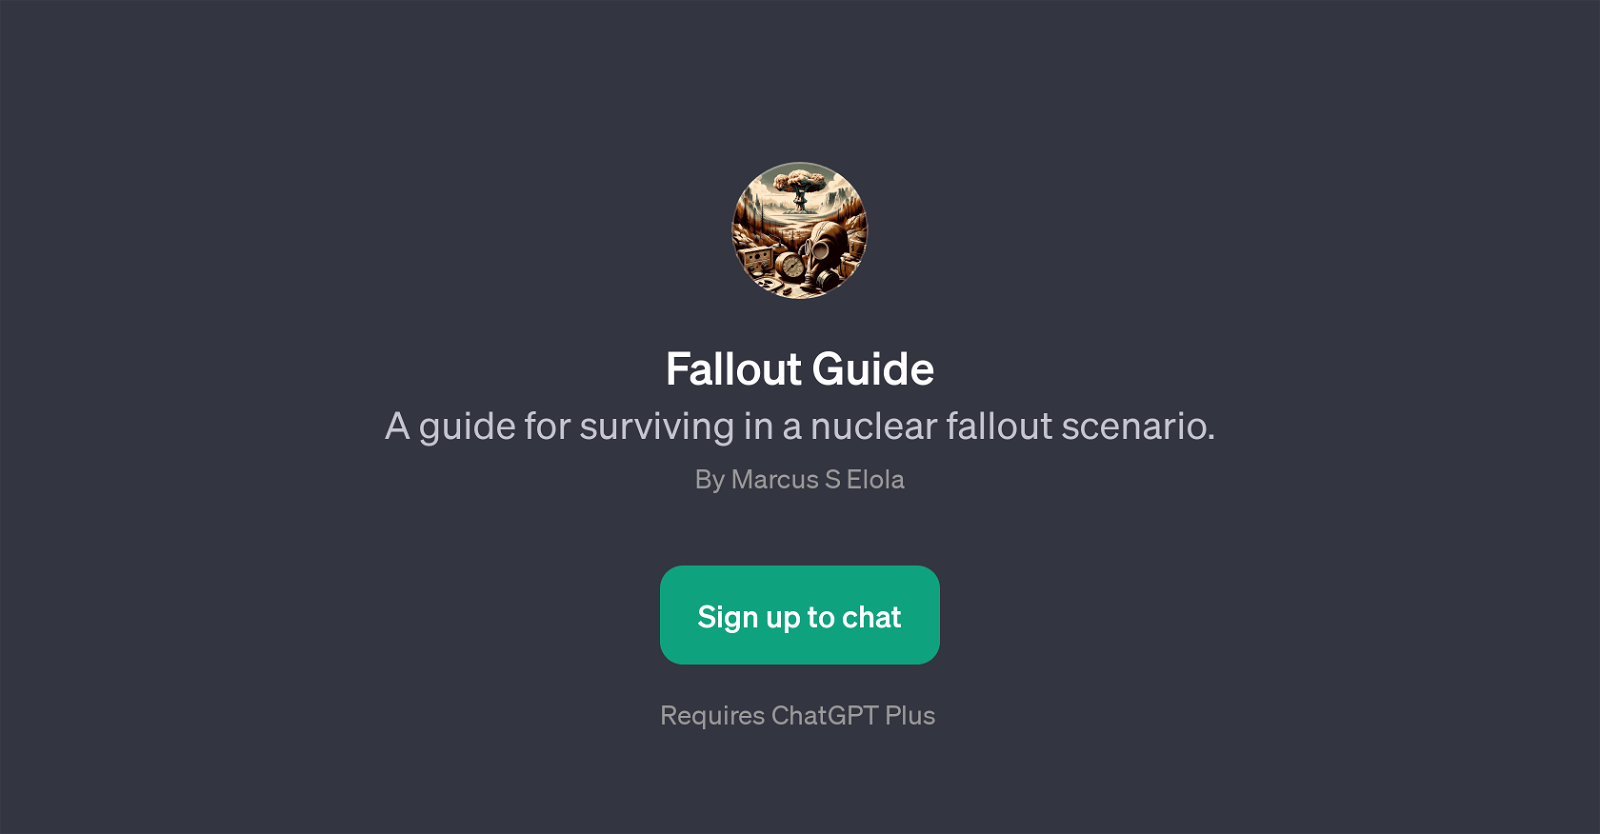 Fallout Guide website